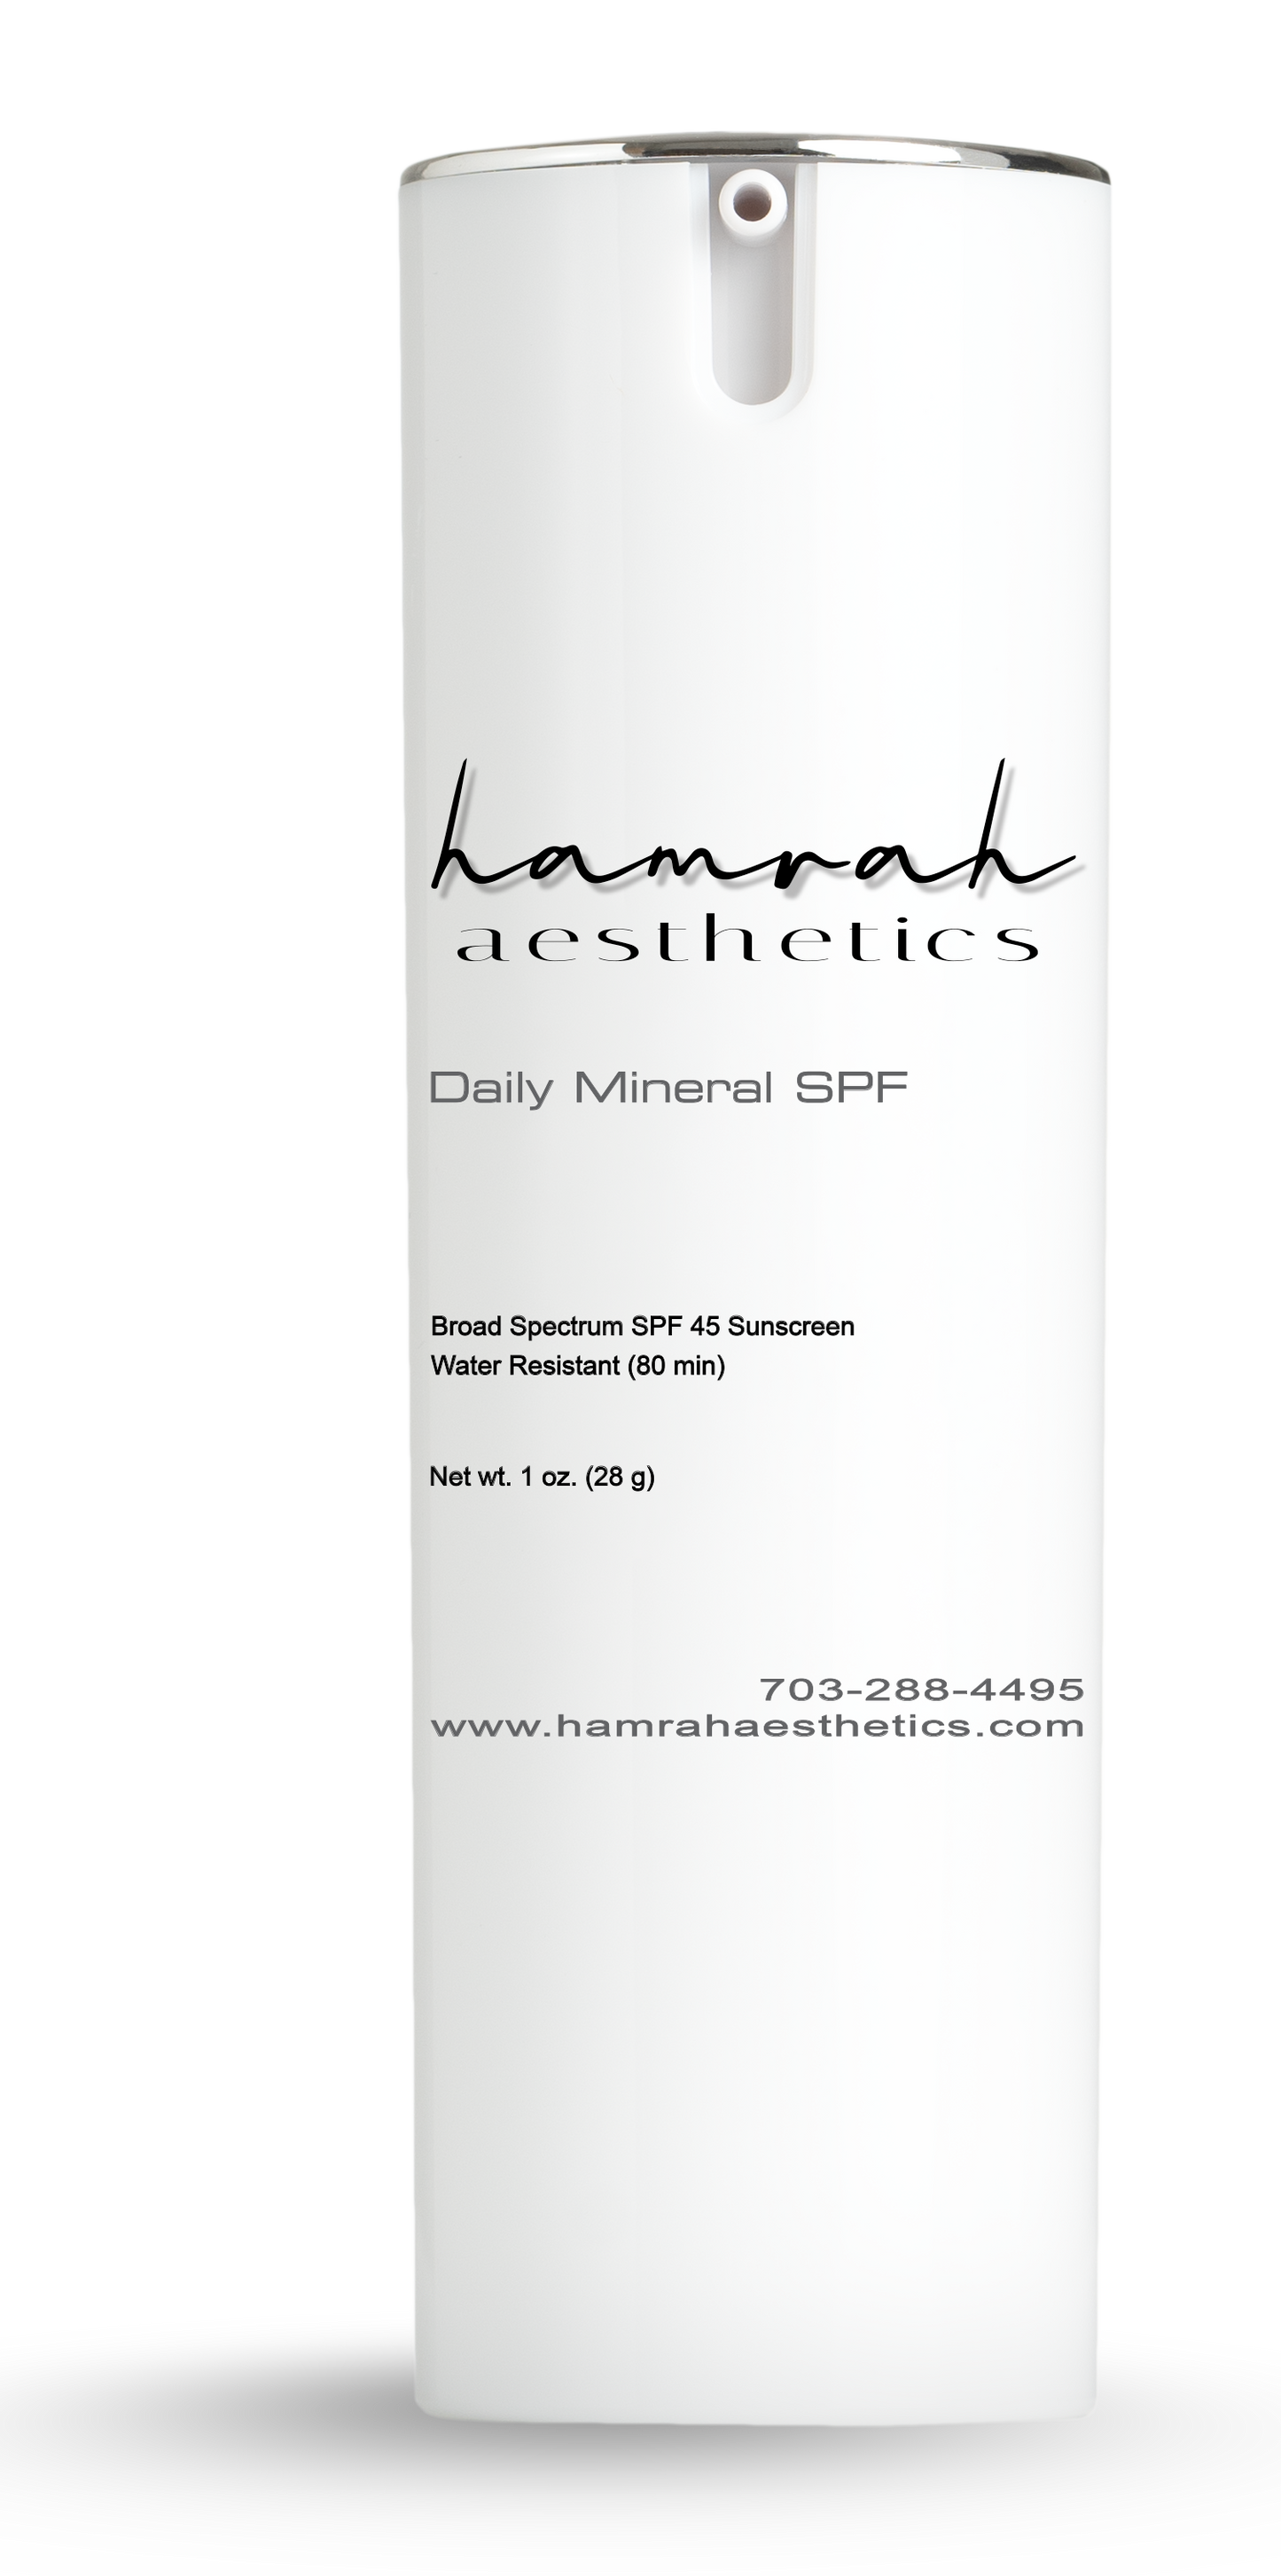 Daily Mineral SPF